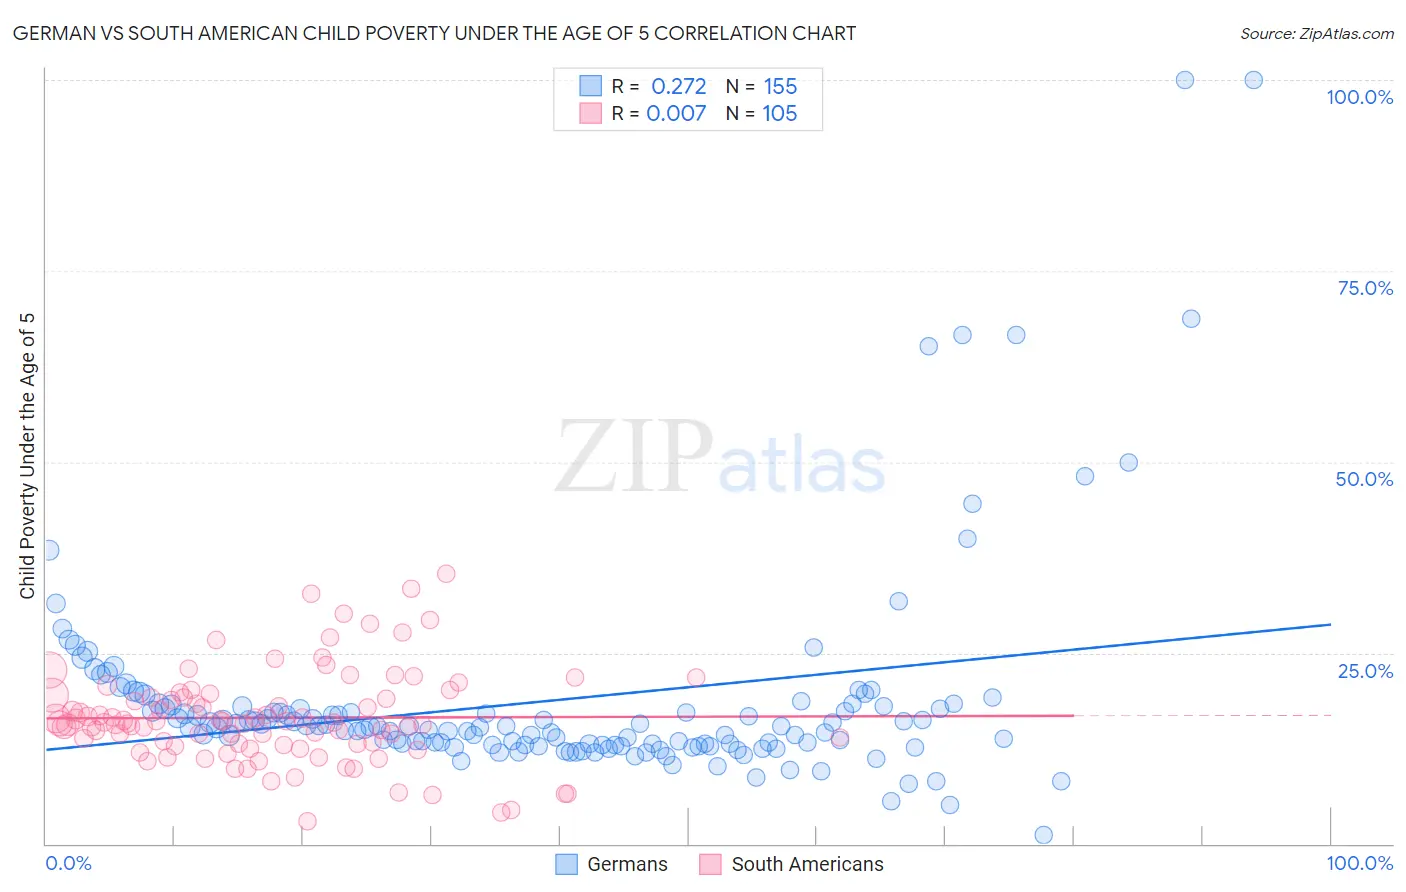 German vs South American Child Poverty Under the Age of 5